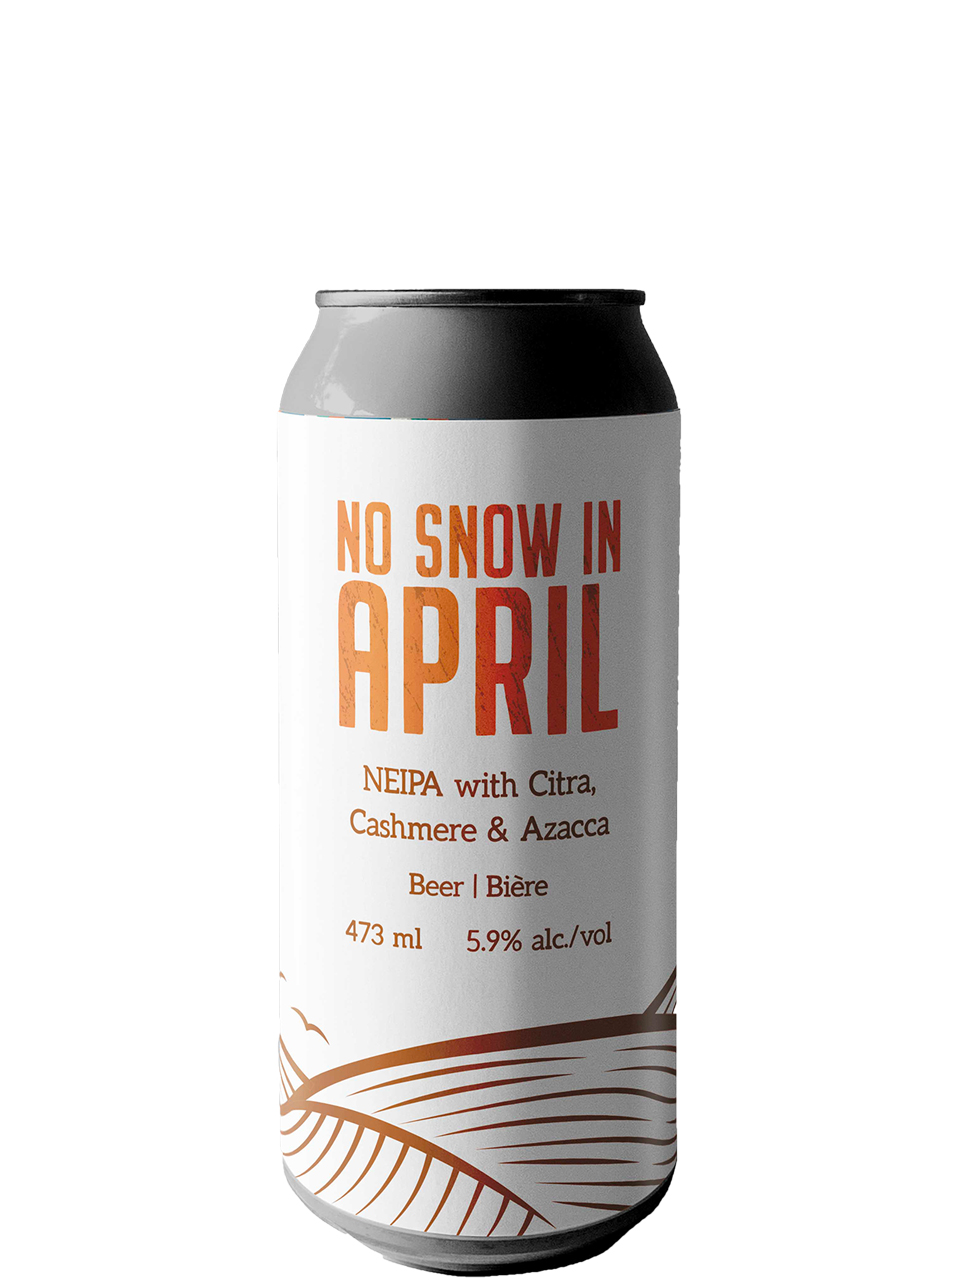 Baccalieu Trail No Snow in April NEIPA 473ml Can